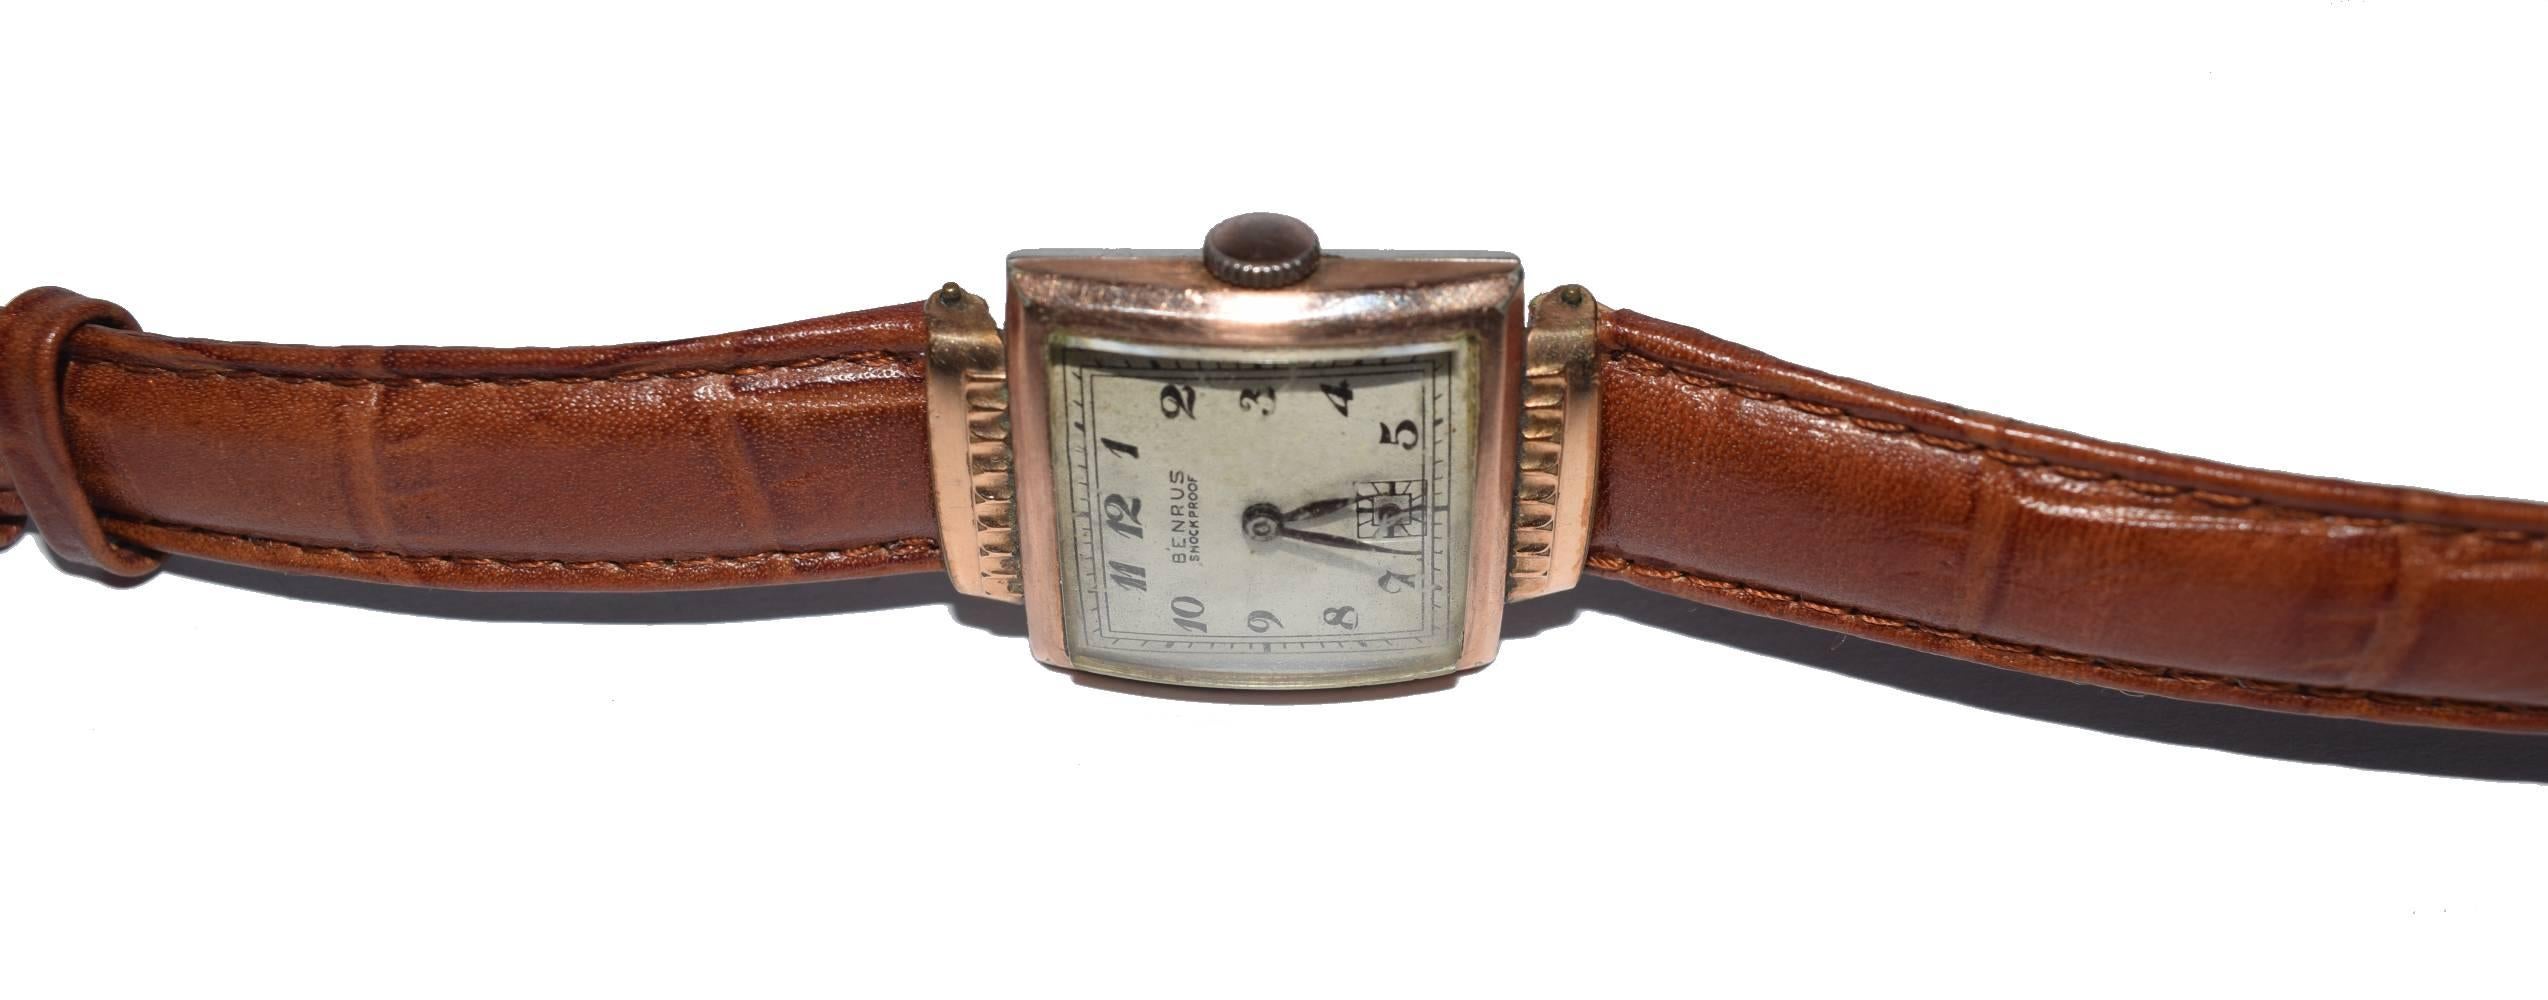 Gold Plate Art Deco Watch by Benrus, Swiss 17 Jewels with Hidden Lug